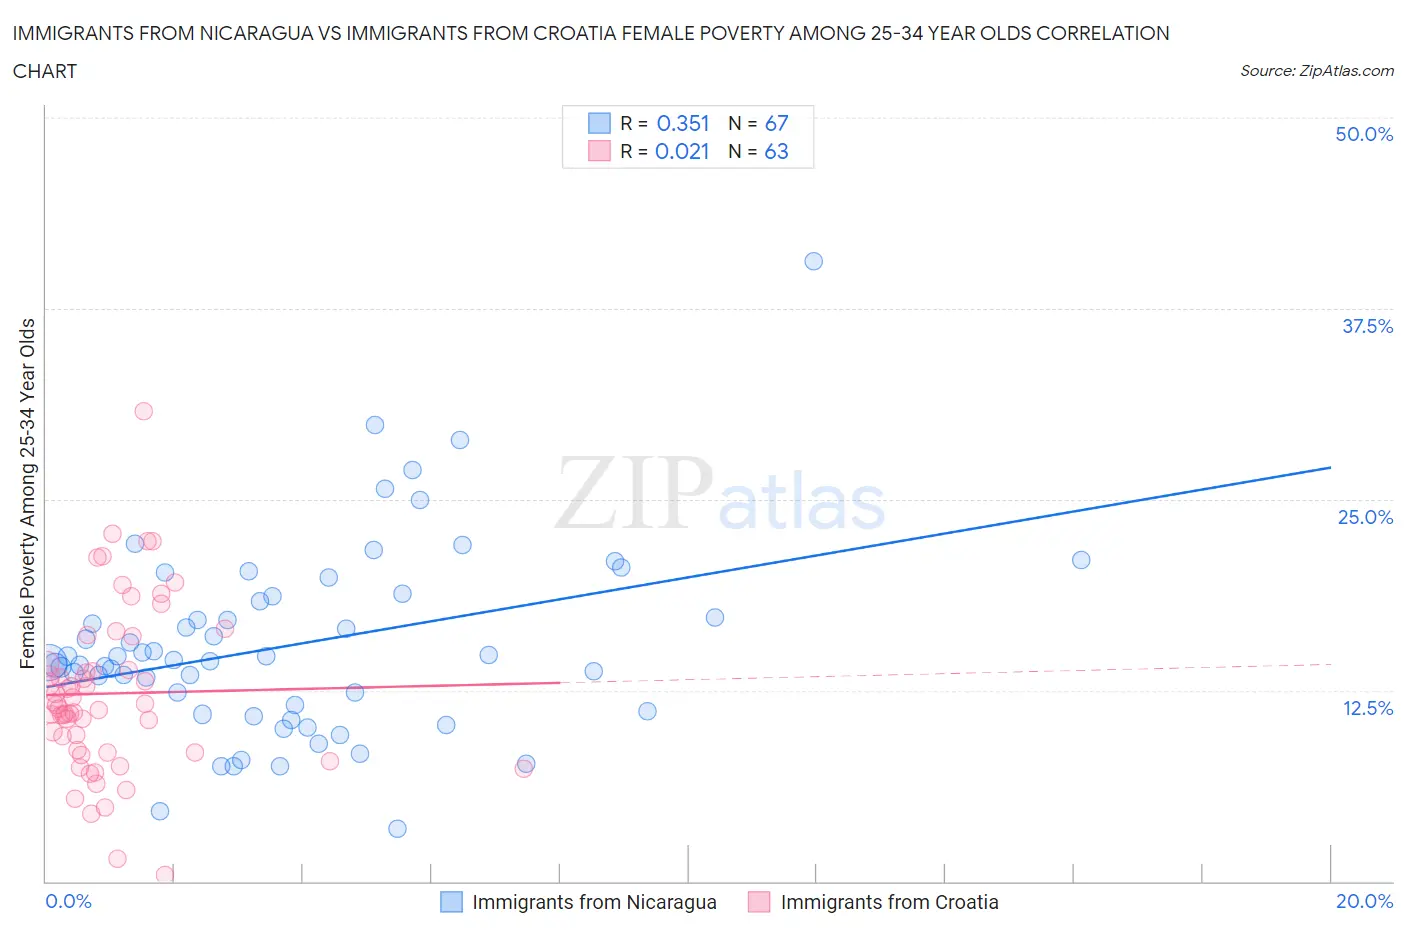 Immigrants from Nicaragua vs Immigrants from Croatia Female Poverty Among 25-34 Year Olds